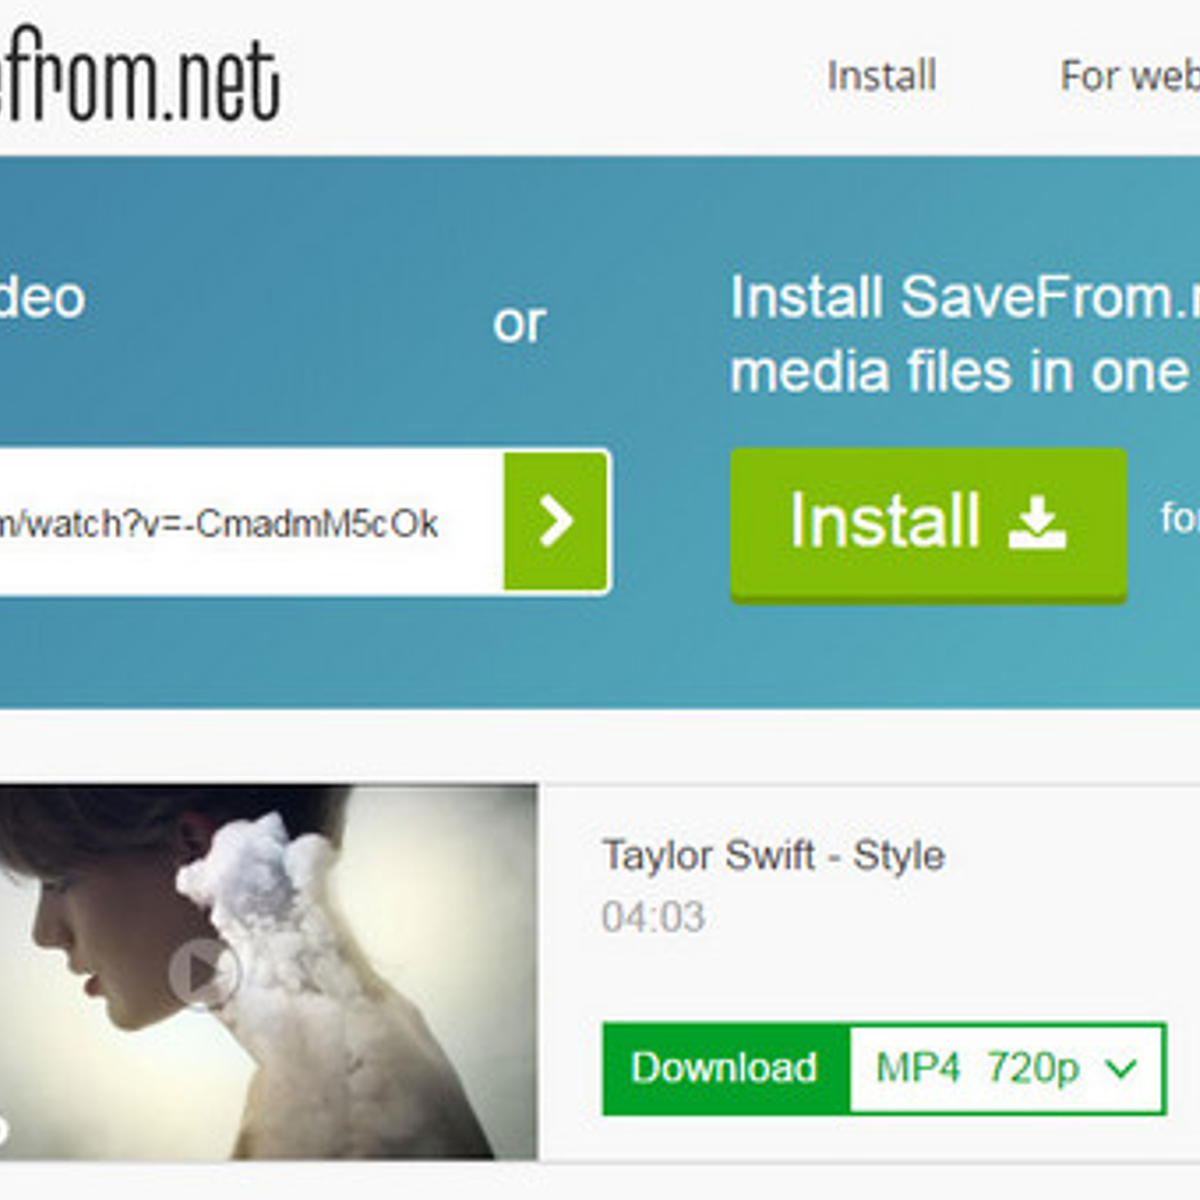 savefrom-net-com-download-youtube-videos-for-free-savefrom